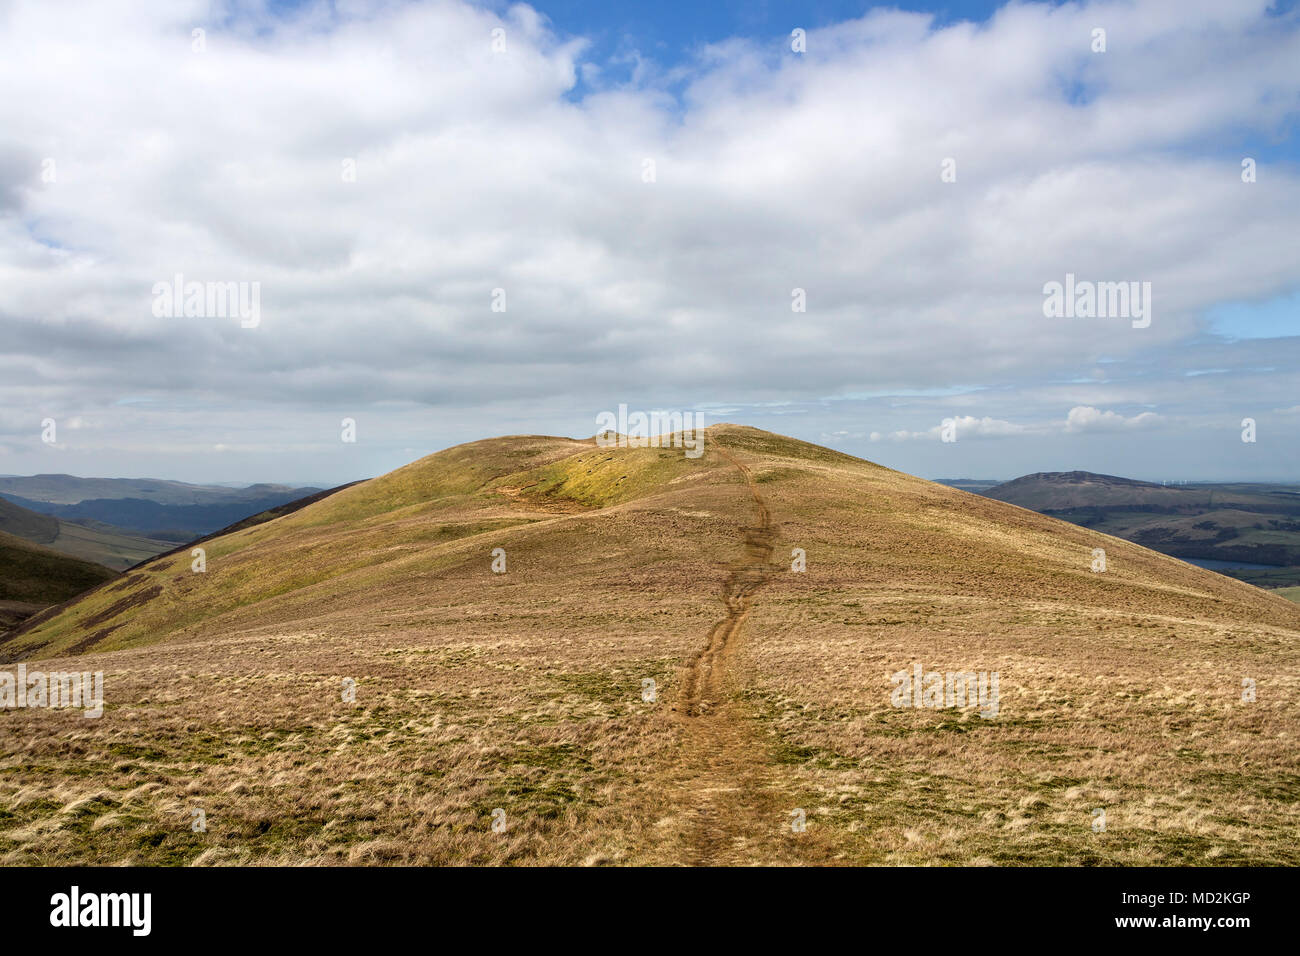 The Summit of Meal Fell from the Slopes of Great Sca Fell, Uldale Fells, Lake District, Cumbria, UK Stock Photo